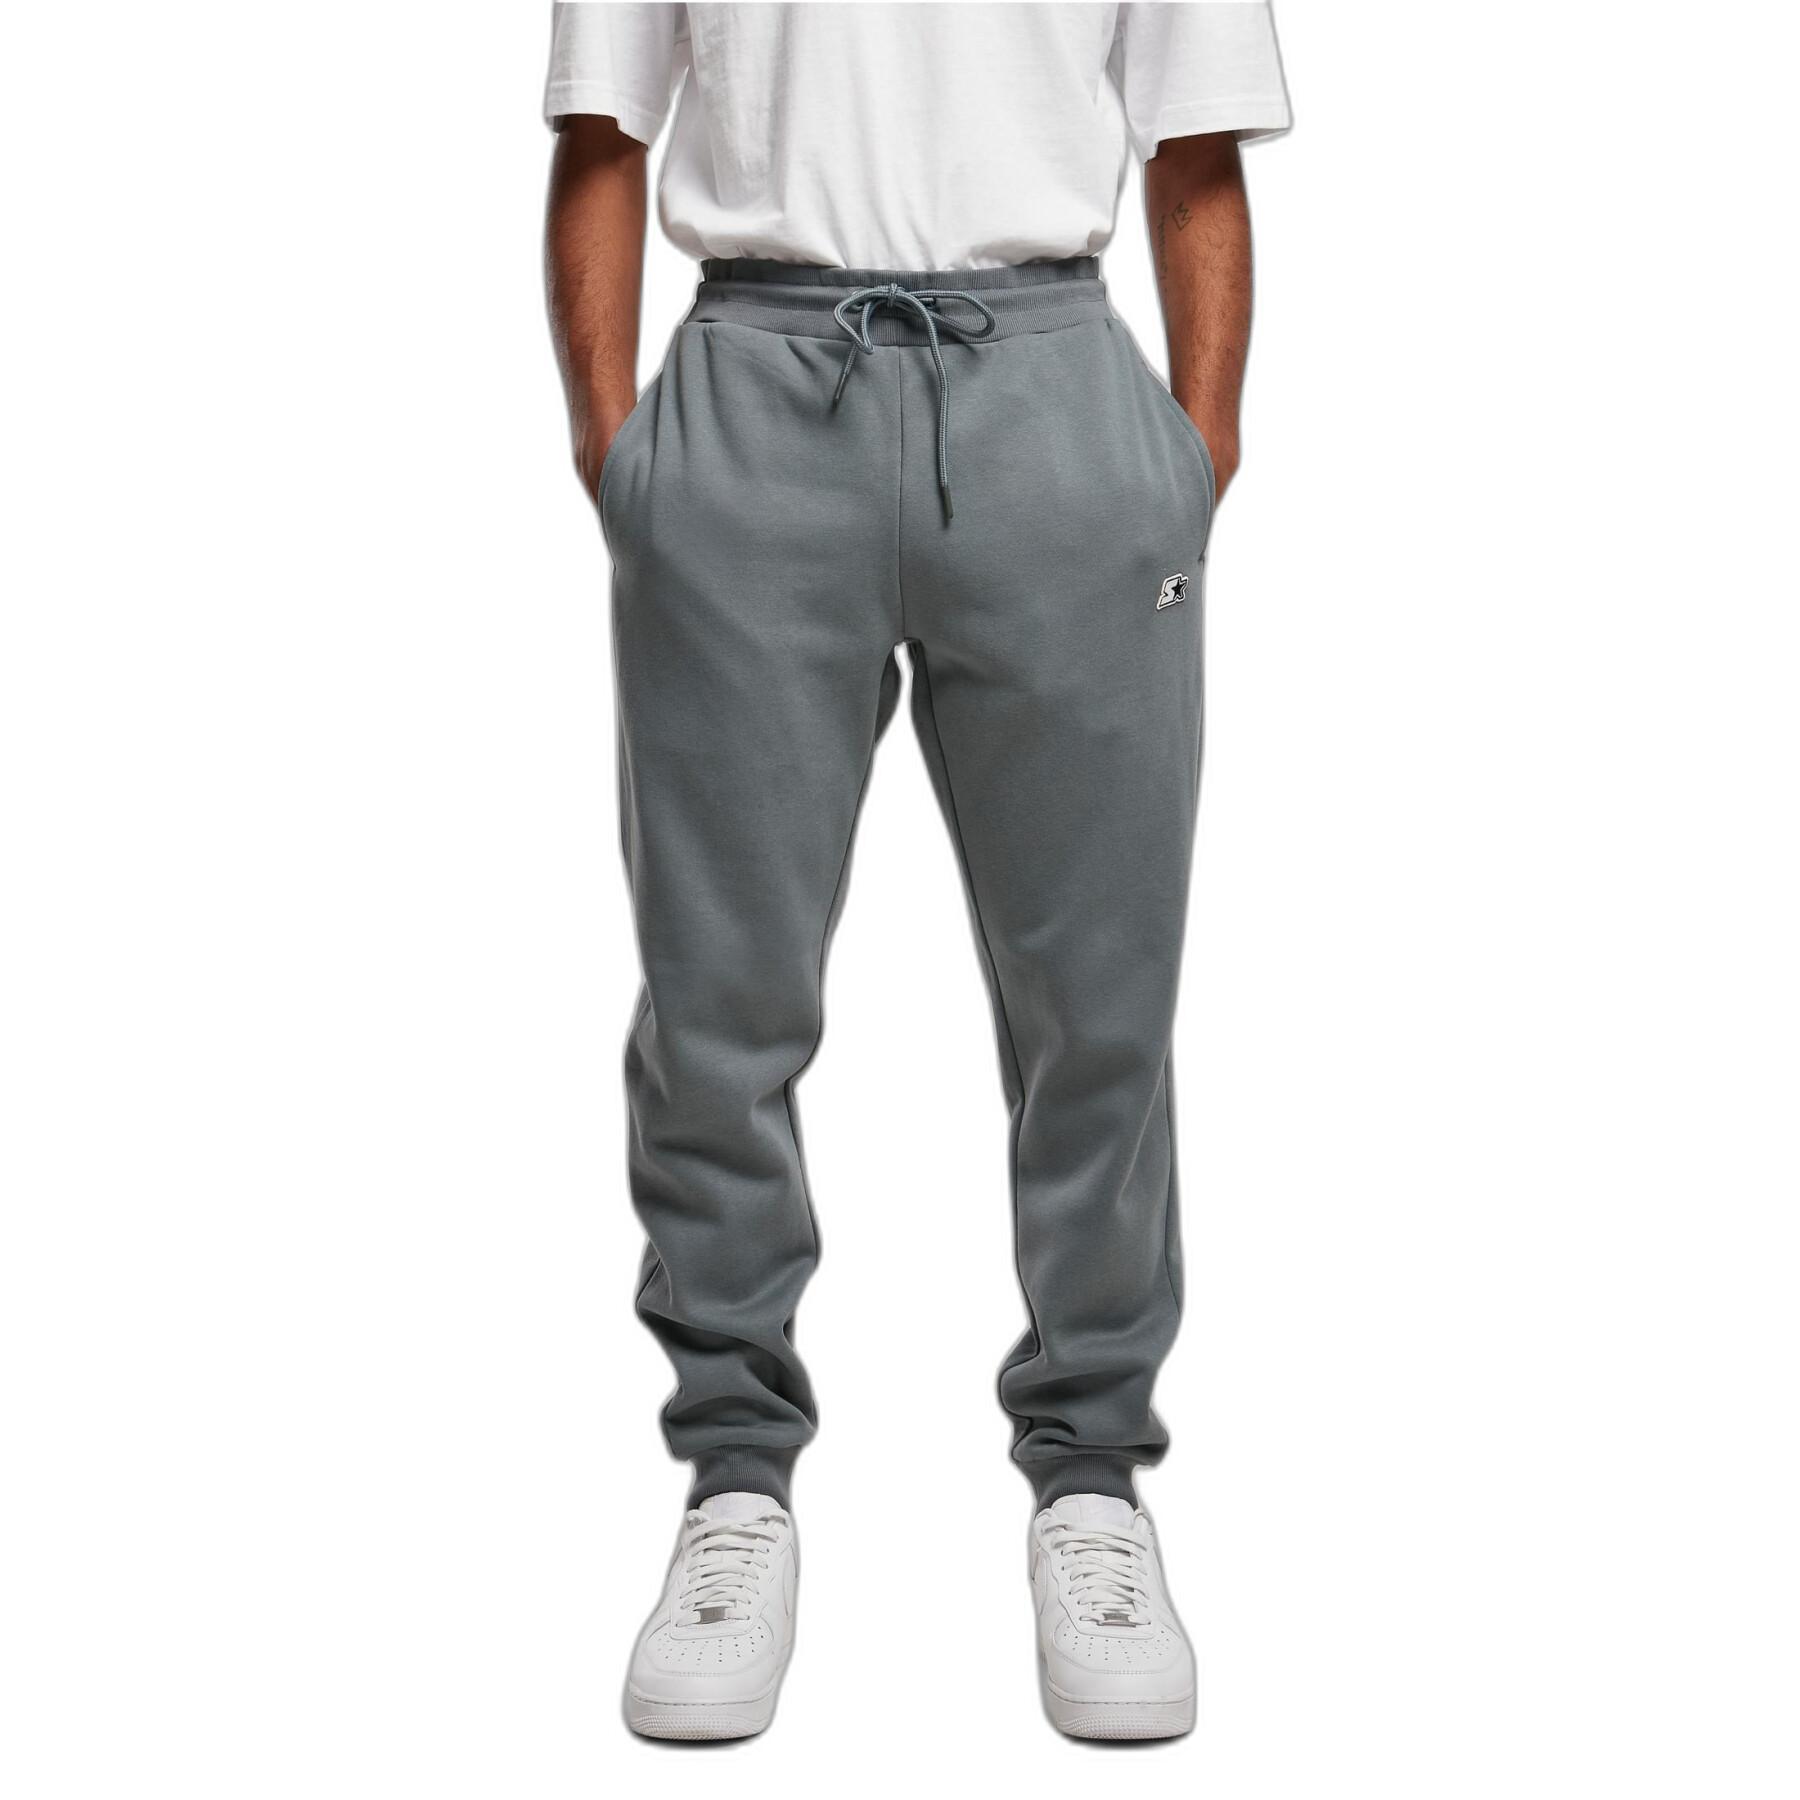 Jogging Starter Essential - Trousers - Men's Lifestyle - Lifestyle